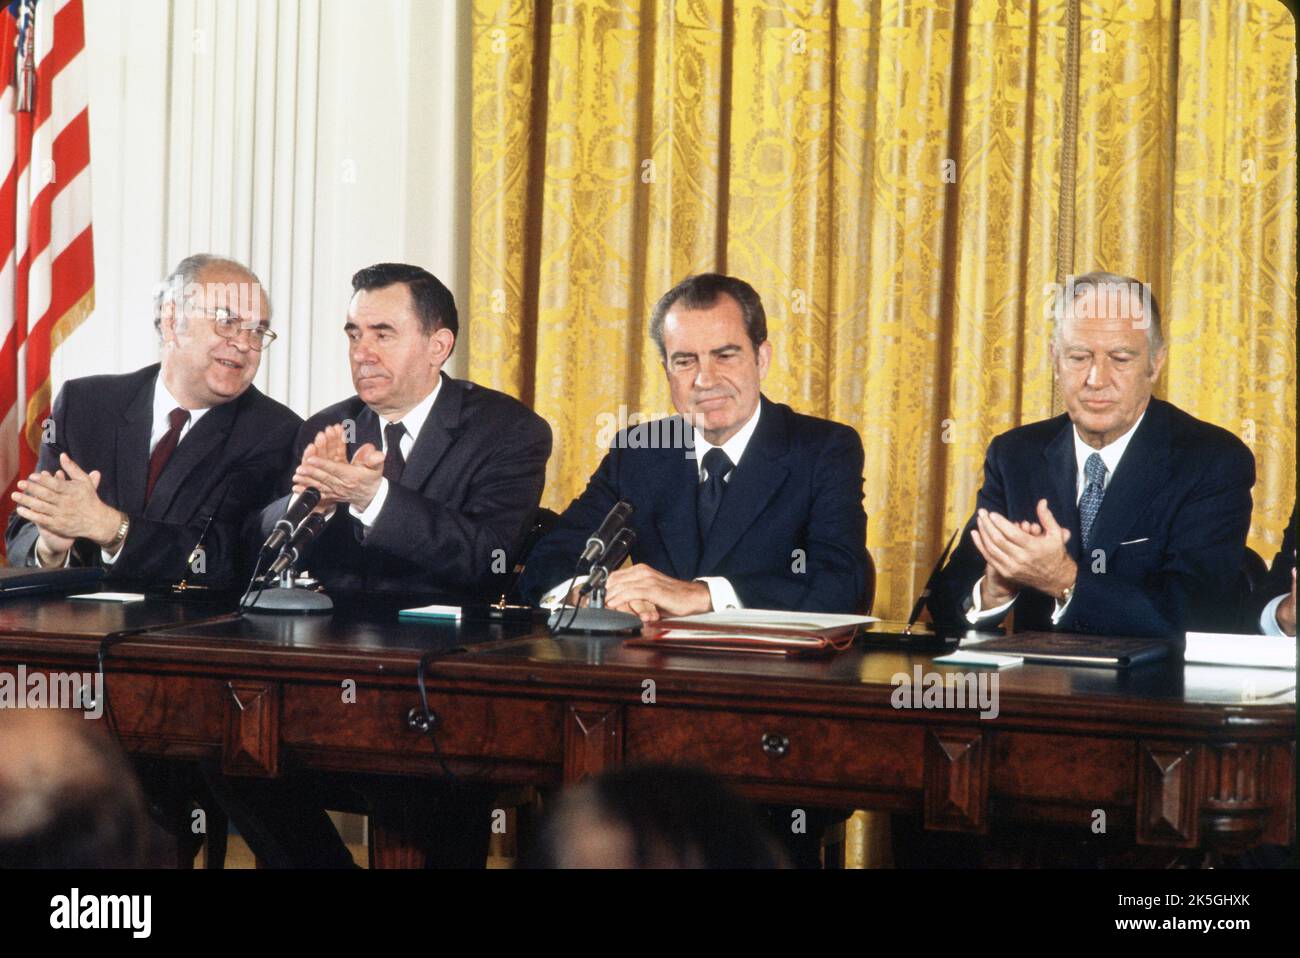 United States President Richard M. Nixon, second right, makes remarks during a signing ceremony for the instruments of ratification of the SALT agreements between the Union of Soviet Socialist Republics (USSR) and the United States in the East Room of the White House in Washington, DC on October 3, 1972. Pictured from left to right: Soviet Ambassador Anatoly F. Dobrynin, Soviet Foreign Minister Andrei Gromyko, President Nixon, and US Secretary of State William P. Rogers. The agreements intend to restrain the growth of the nuclear arsenals of both nations. Credit: Arnie Sachs / CNP Stock Photo